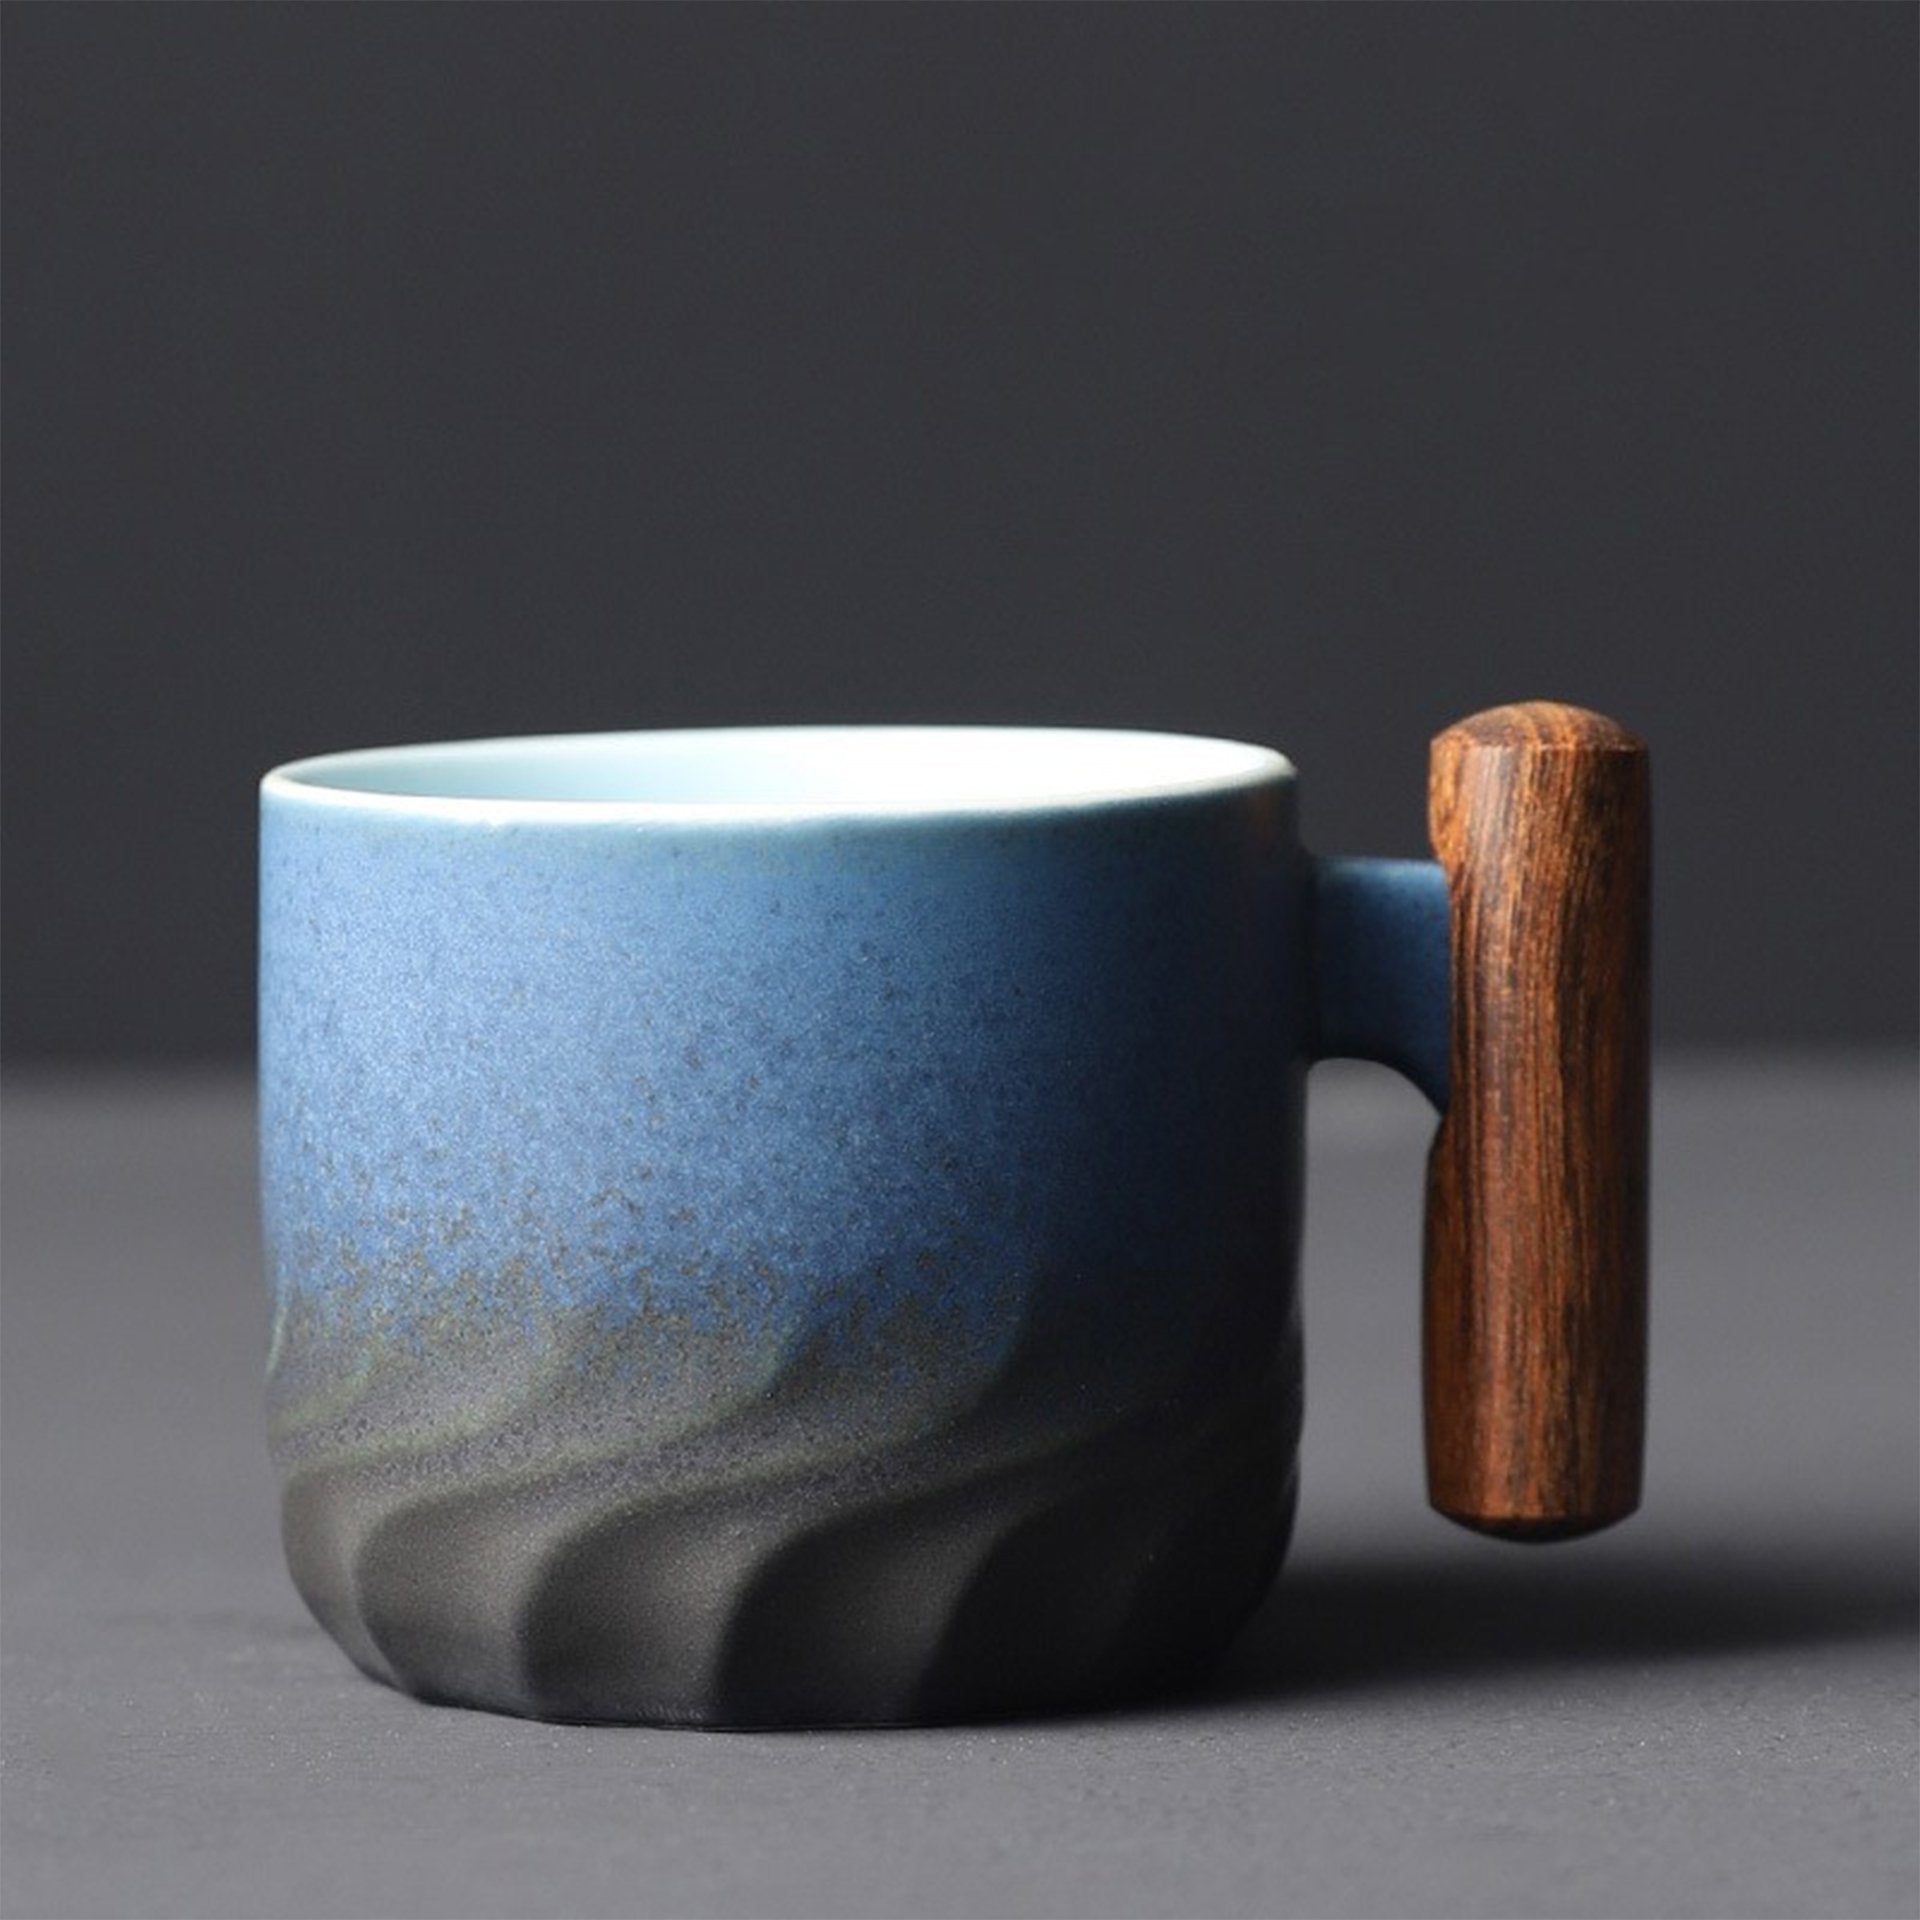 Blue ceramic mug with wooden handle, side view